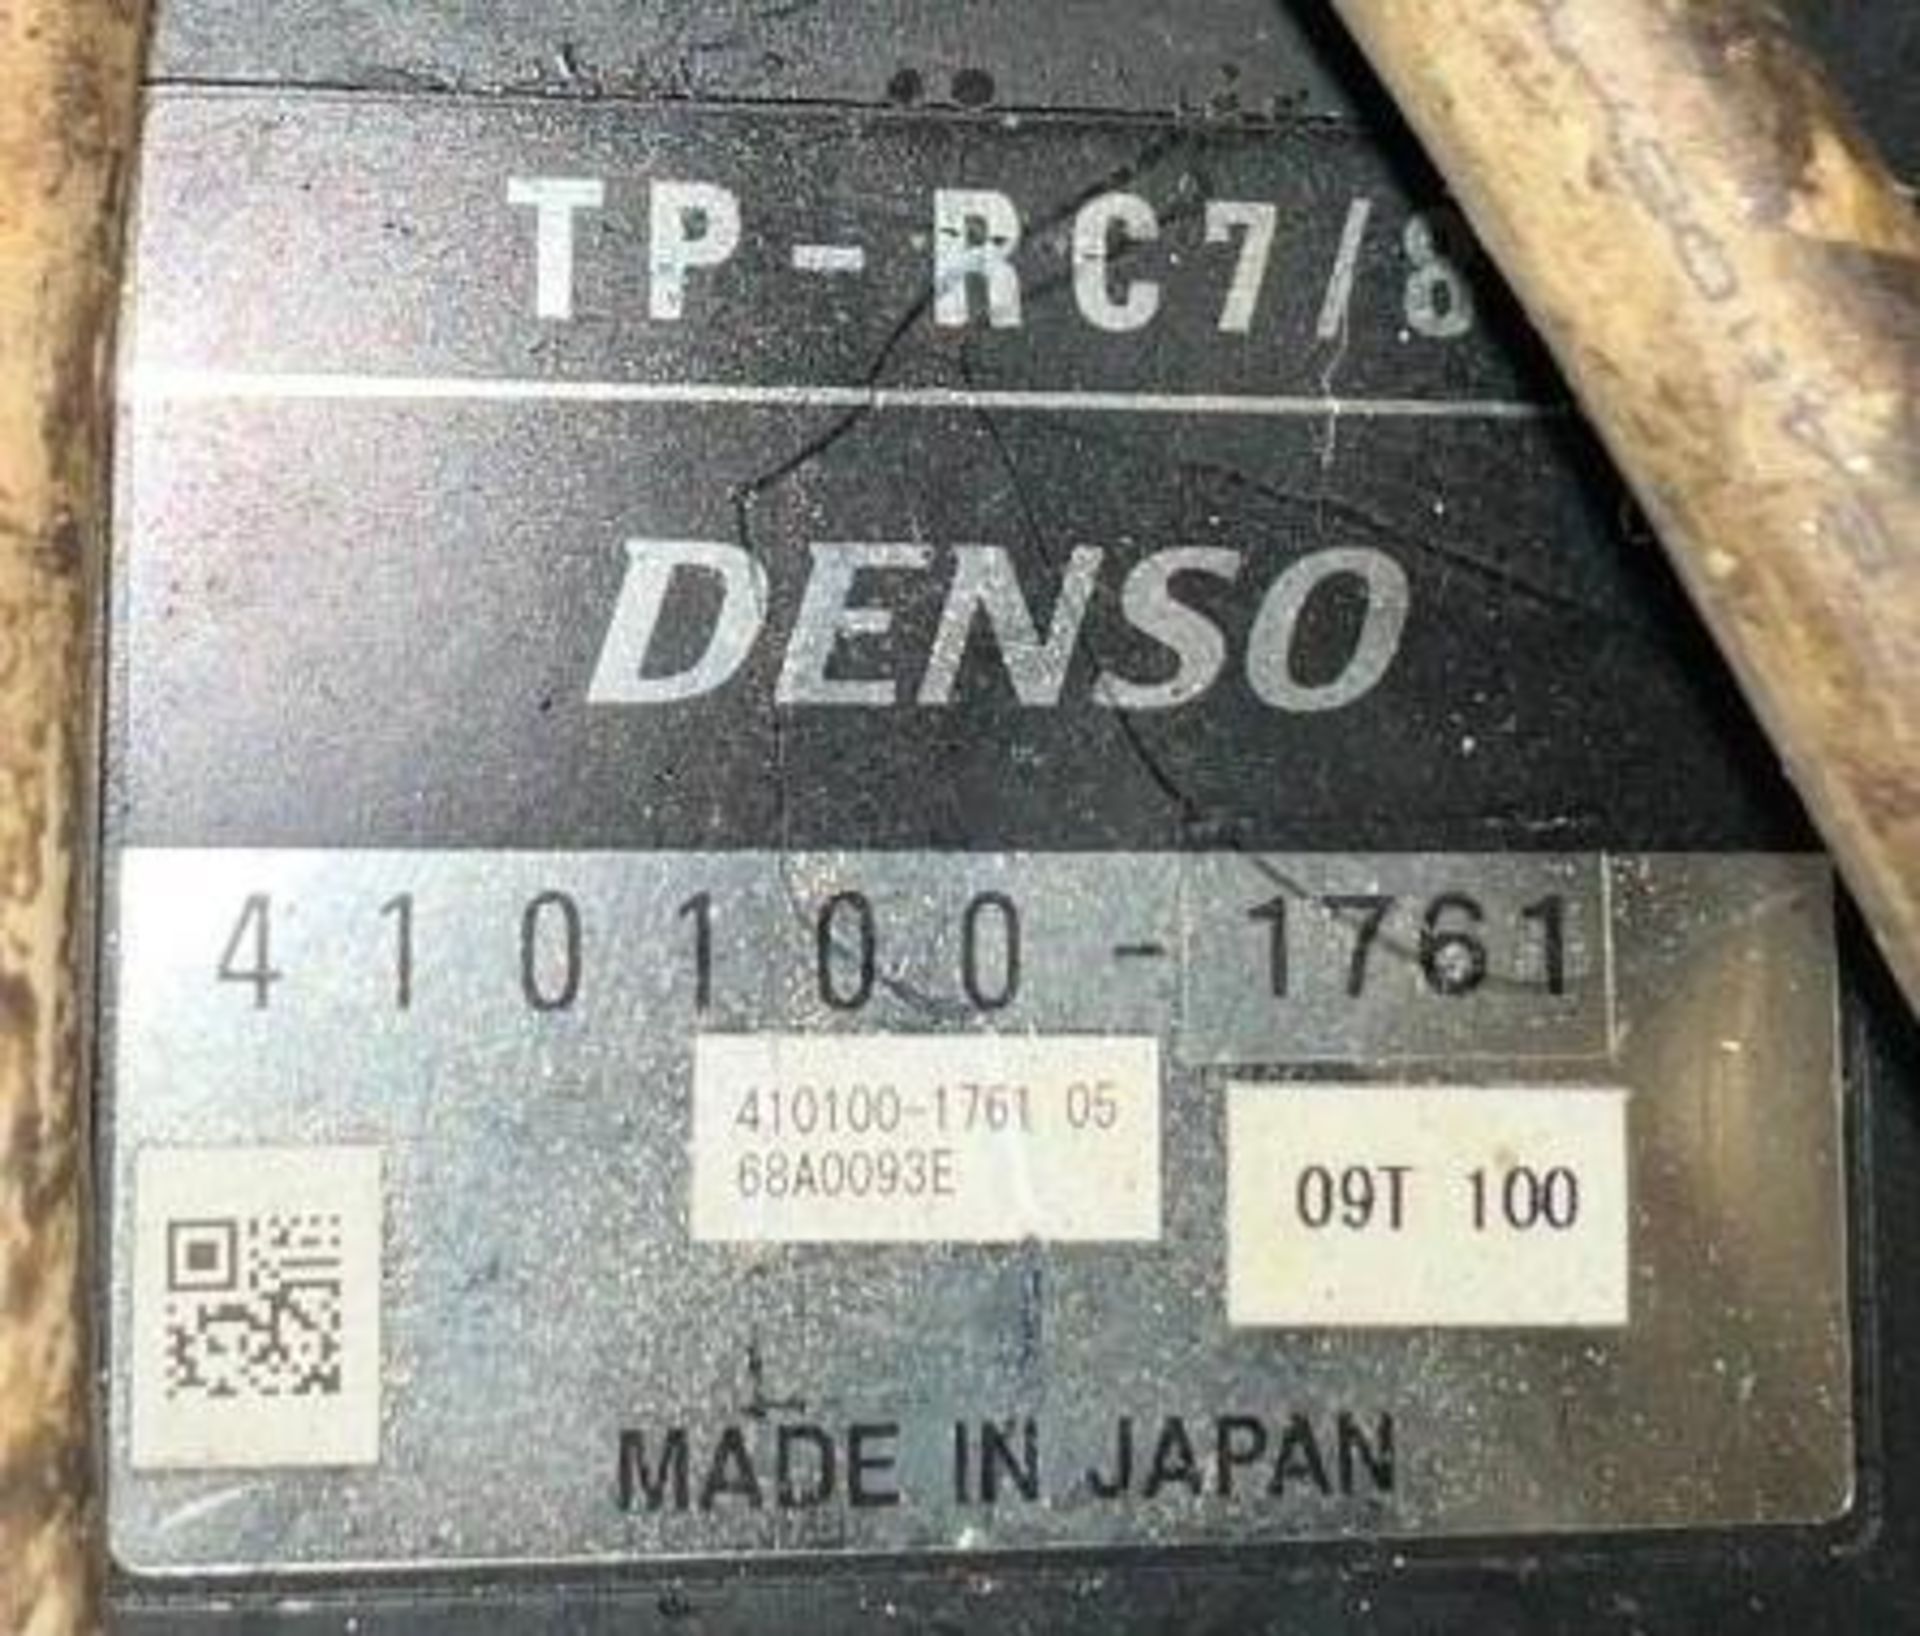 Lot of (2) Denso #TP-RC7/8 / #410100-1761 Robot Pendants - Image 4 of 4